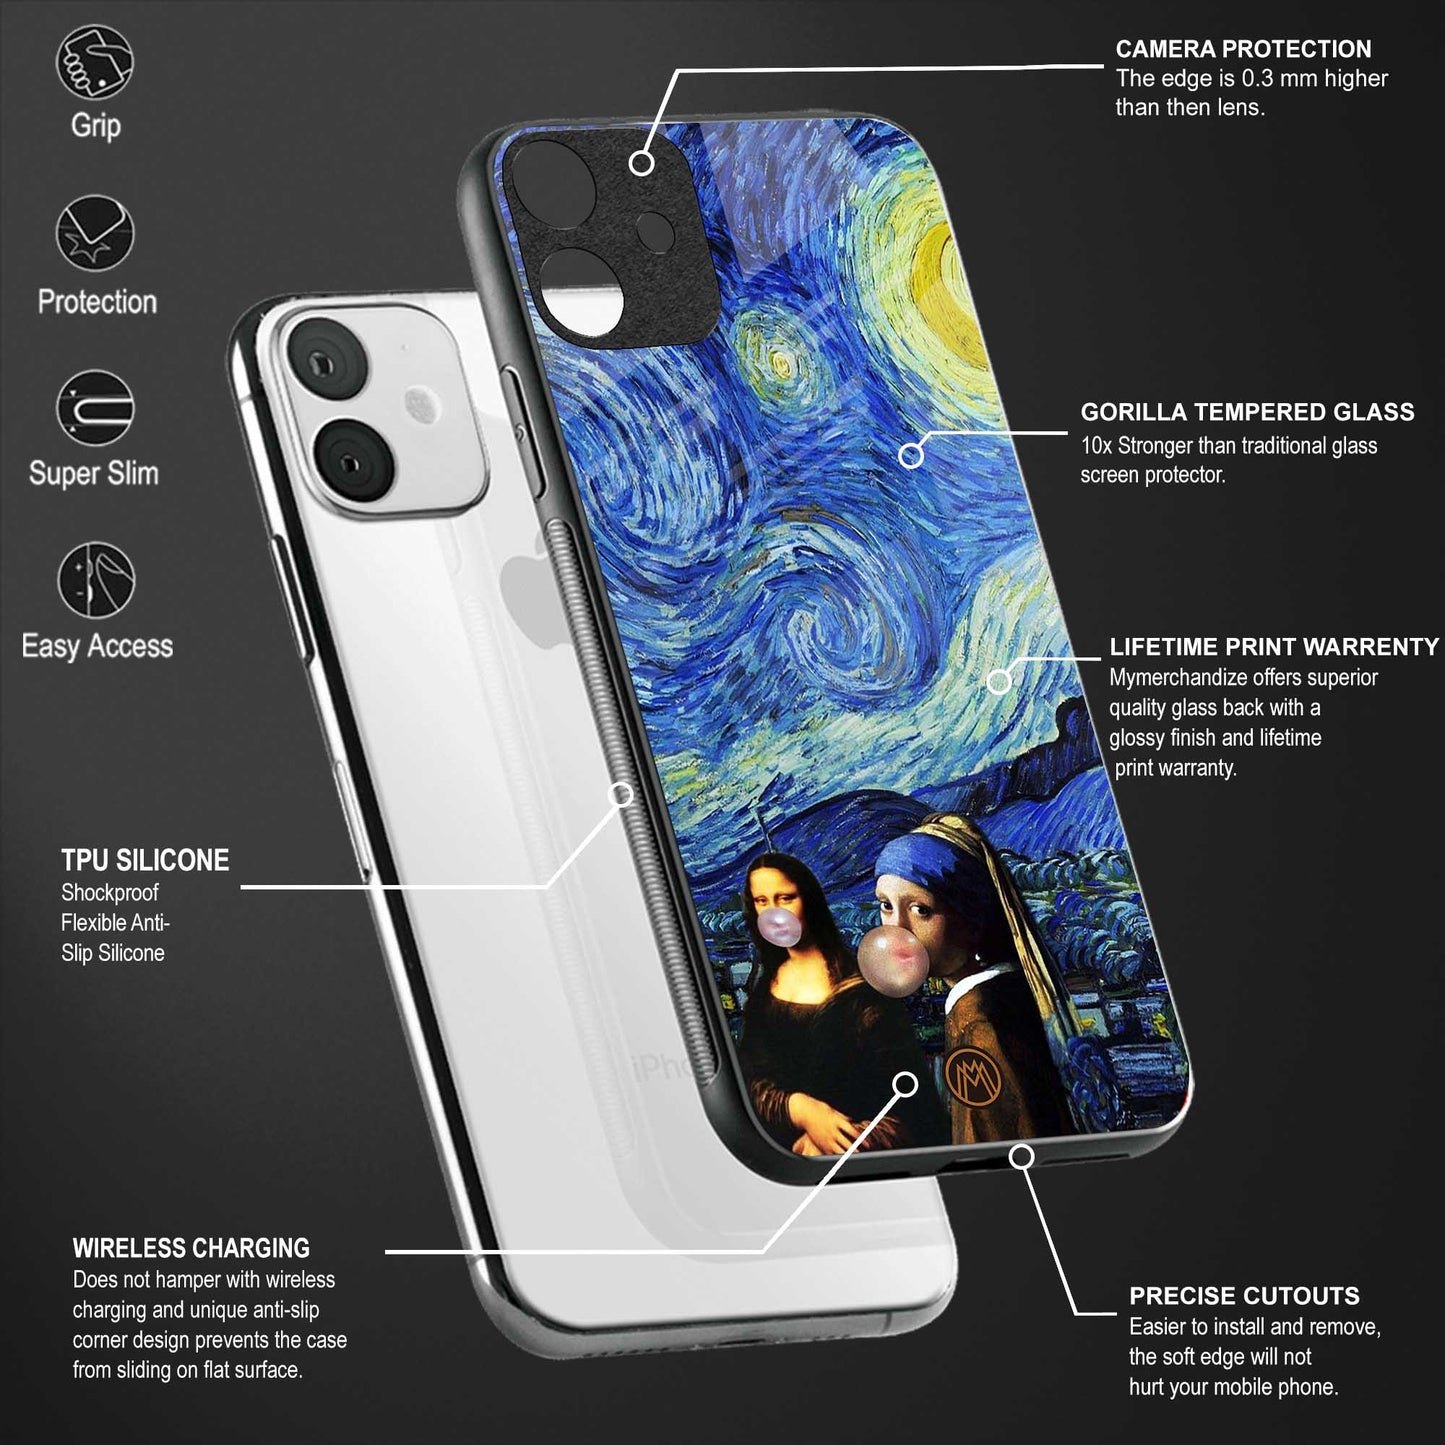 mona lisa starry night back phone cover | glass case for vivo y16